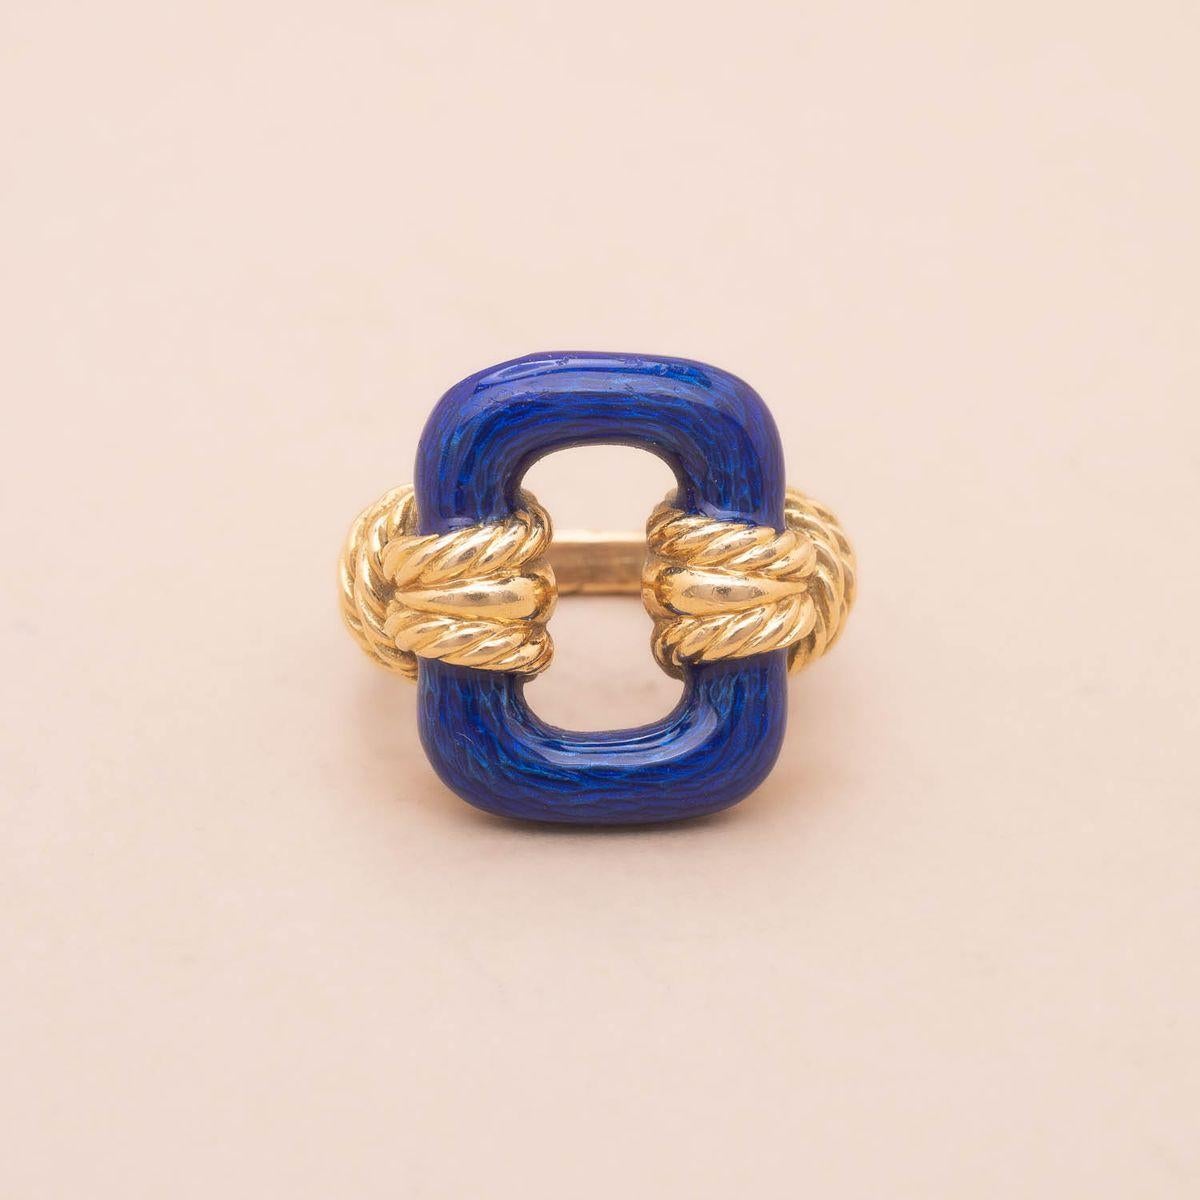 Rectangular vintage 18K gold and blue enamel nautical knot shaped ring. Attributed to Fred. Design inspired directly by the navigation and nautical world, like a number of Fred's creation. 
70s French craftsmanship 
Eagle's head hallmark
Dimensions